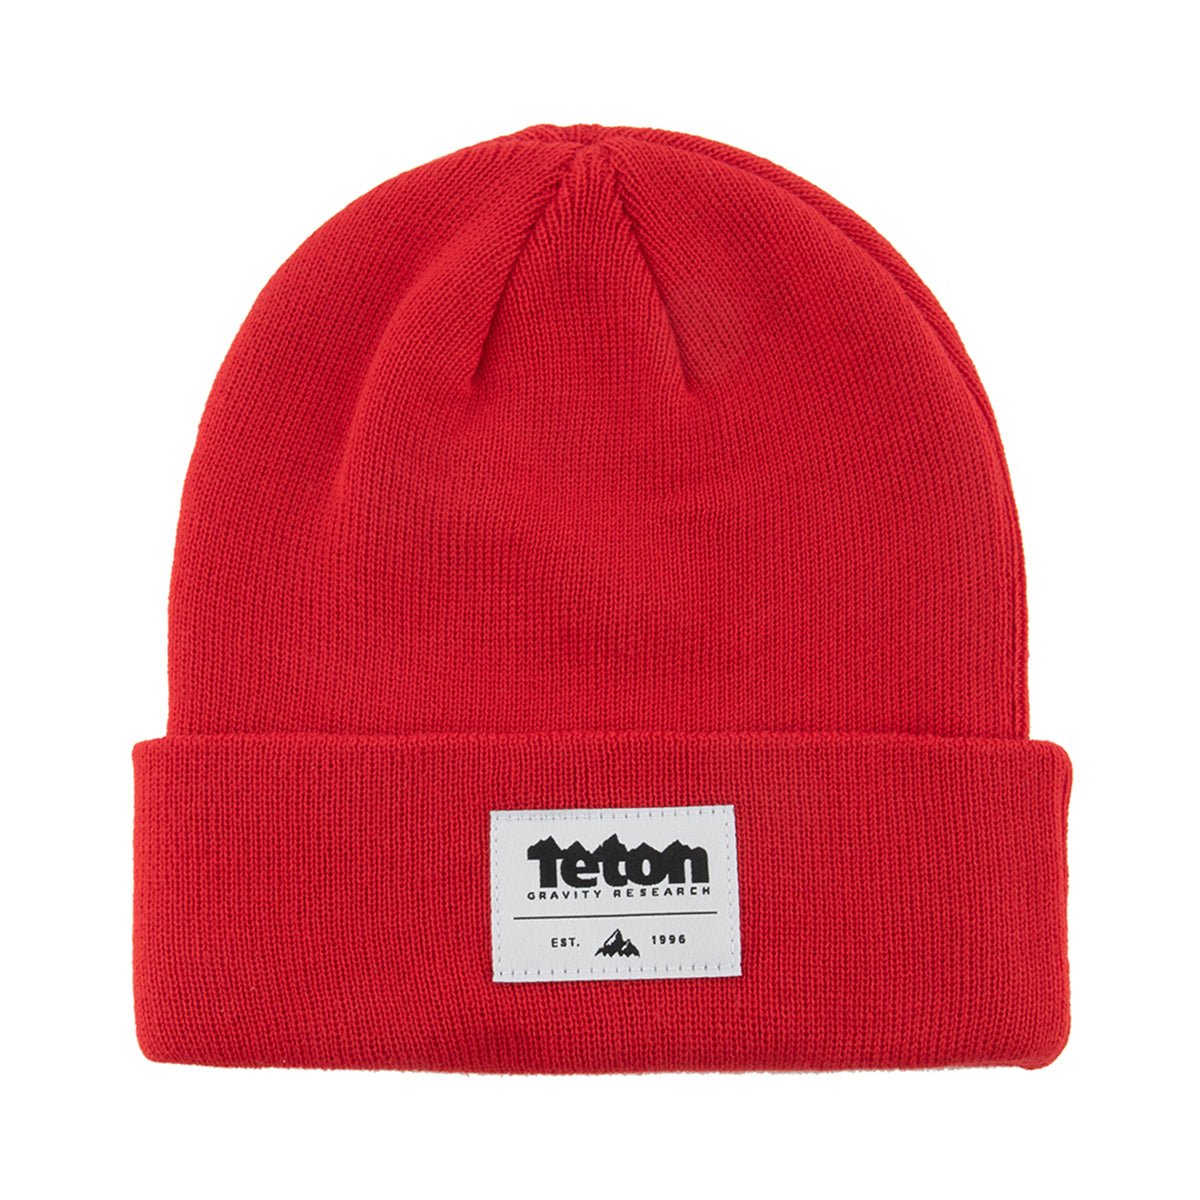 Kids Recycled OG Knit Beanie - Teton Gravity Research